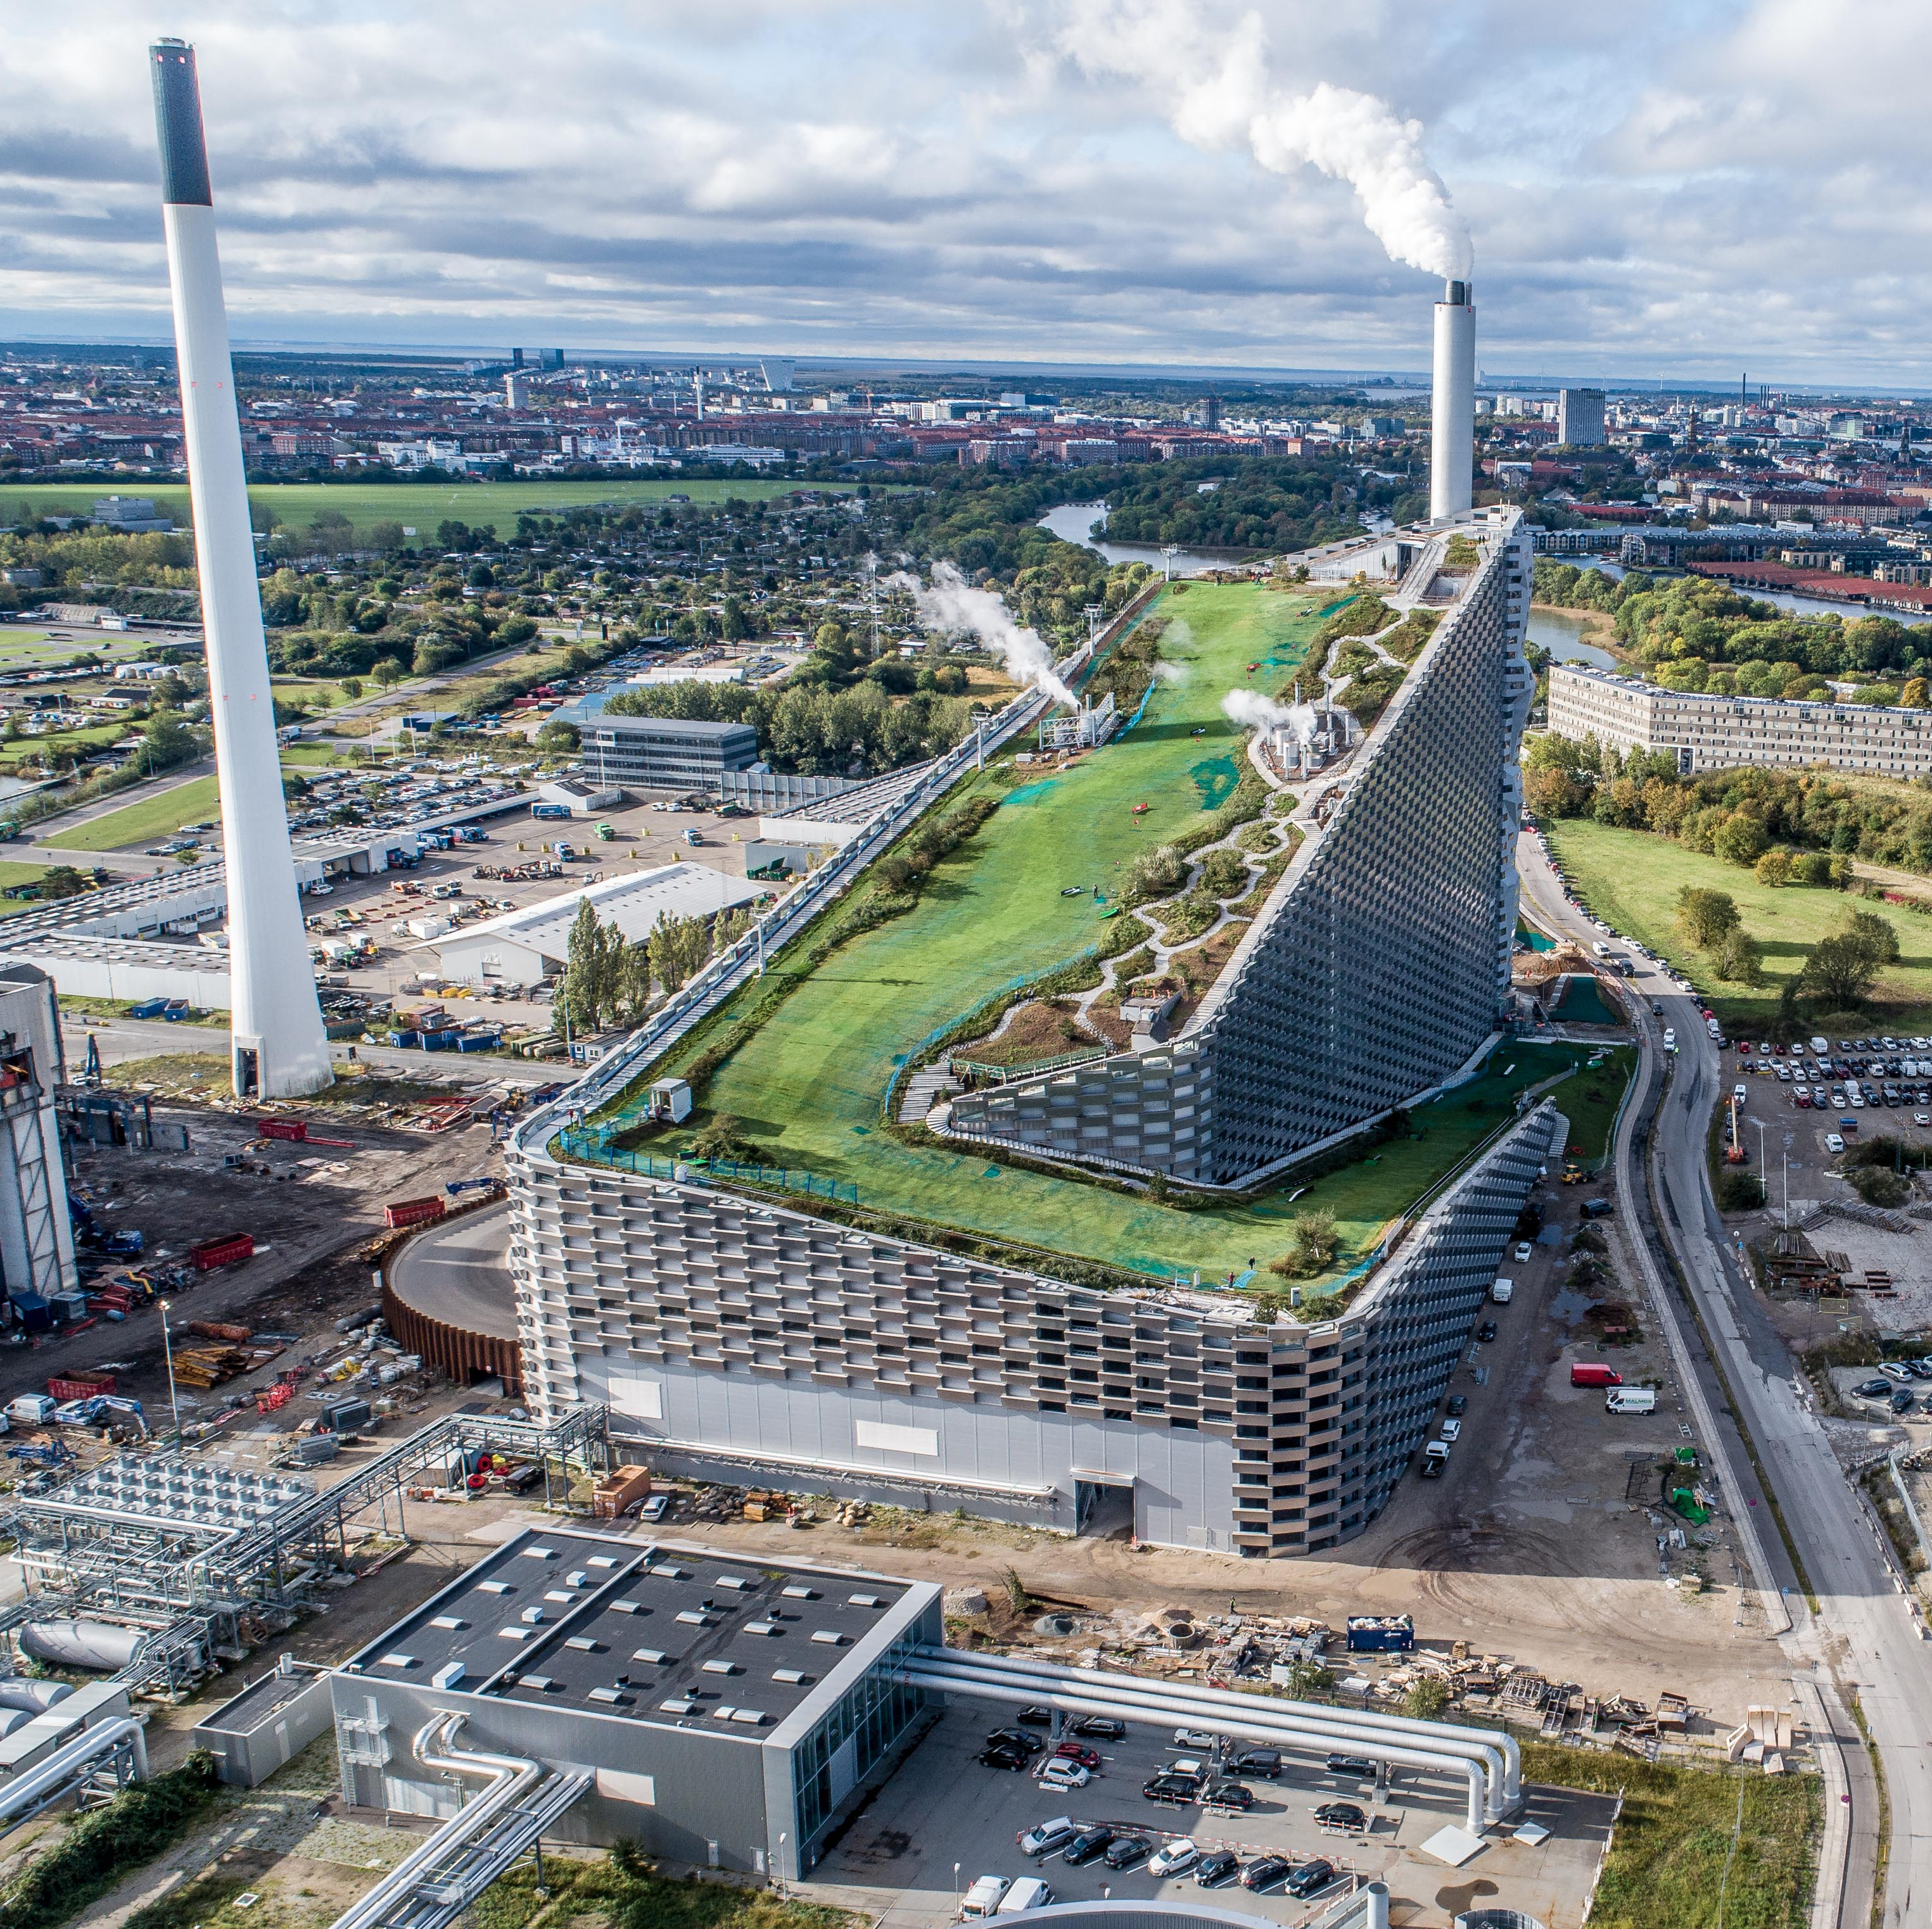 The architectural studio BIG presented the film Making a Mountain about the Amager Bakke waste-to-energy plant in Copenhagen